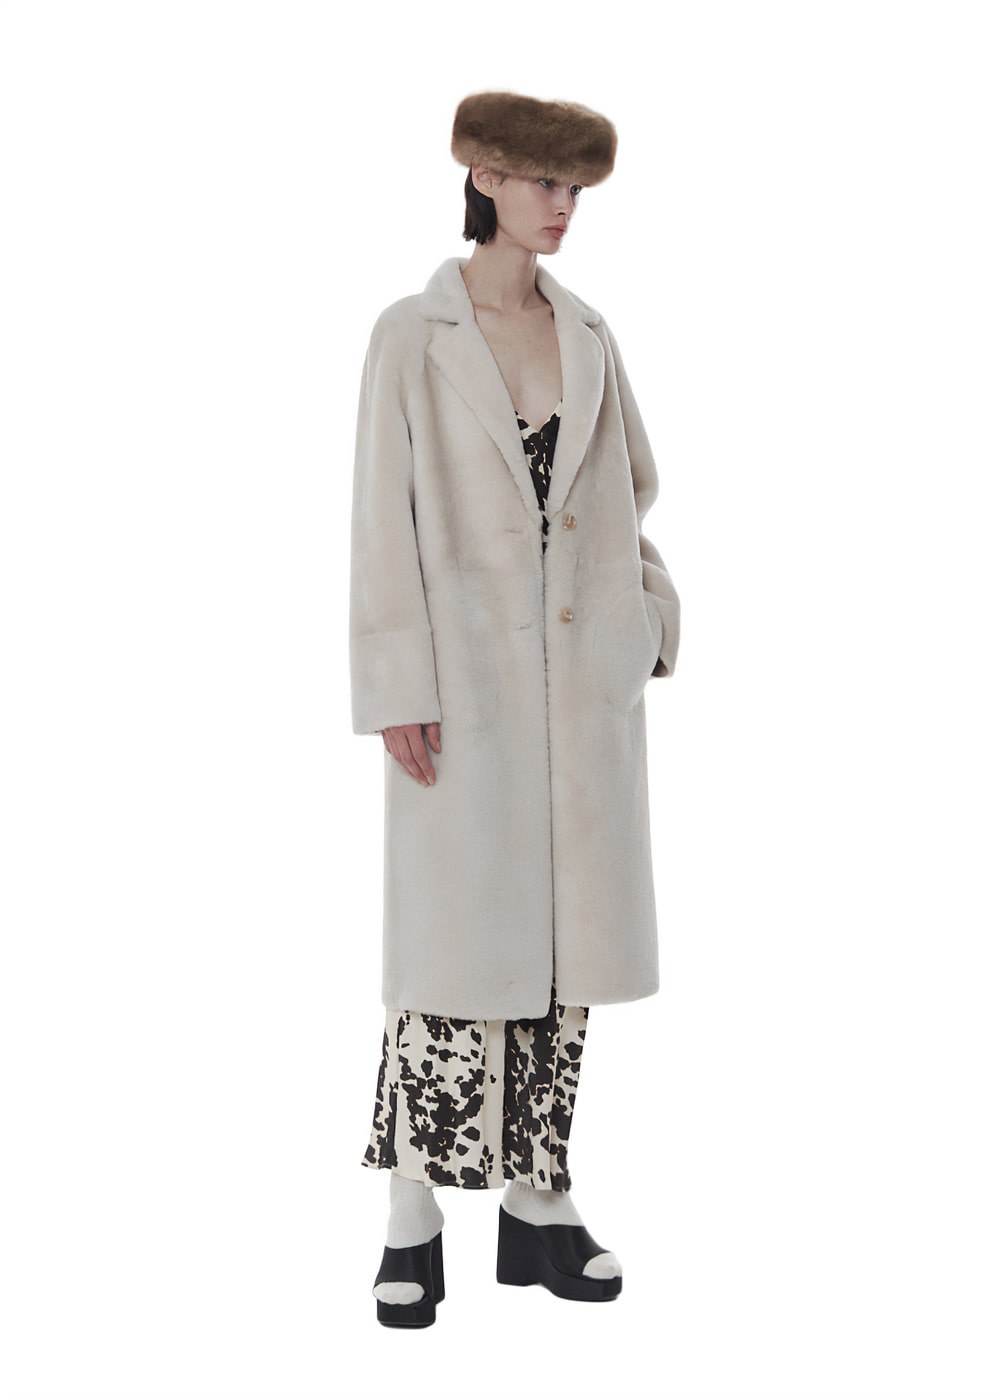 Merino Tailored Collar Long Sheraling Coat IvoryMaterial Spanish MerinoPrice 3,890,000This is a long searing coat made of Merino material that is light, soft with a tailored collar.